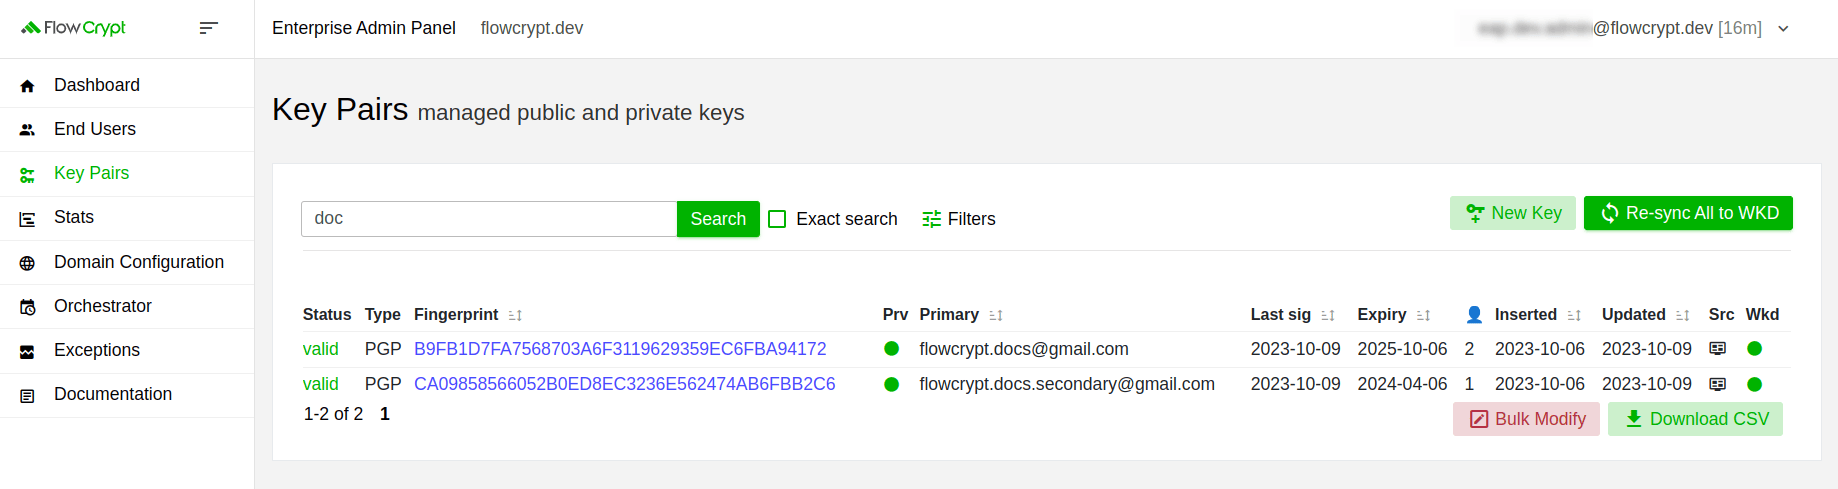 enterprise eap usage key pairs manage keys search for keys search substring